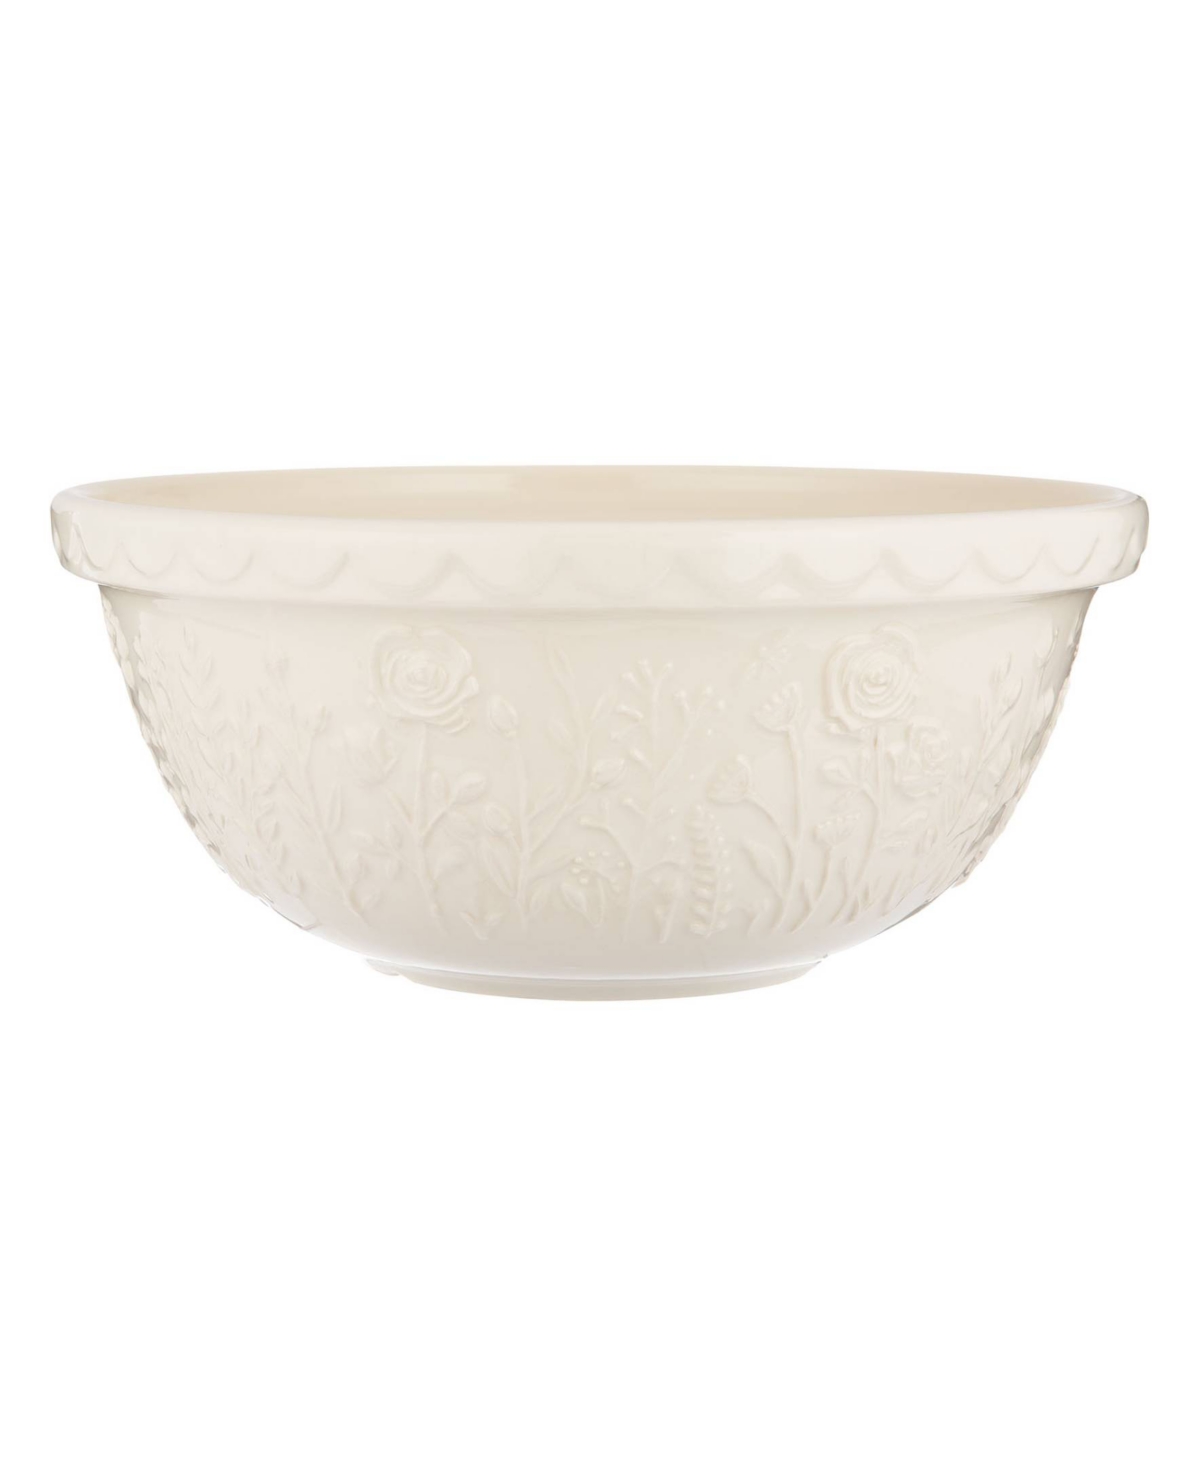 Mason Cash In The Meadow 11.75" Mixing Bowl In Cream